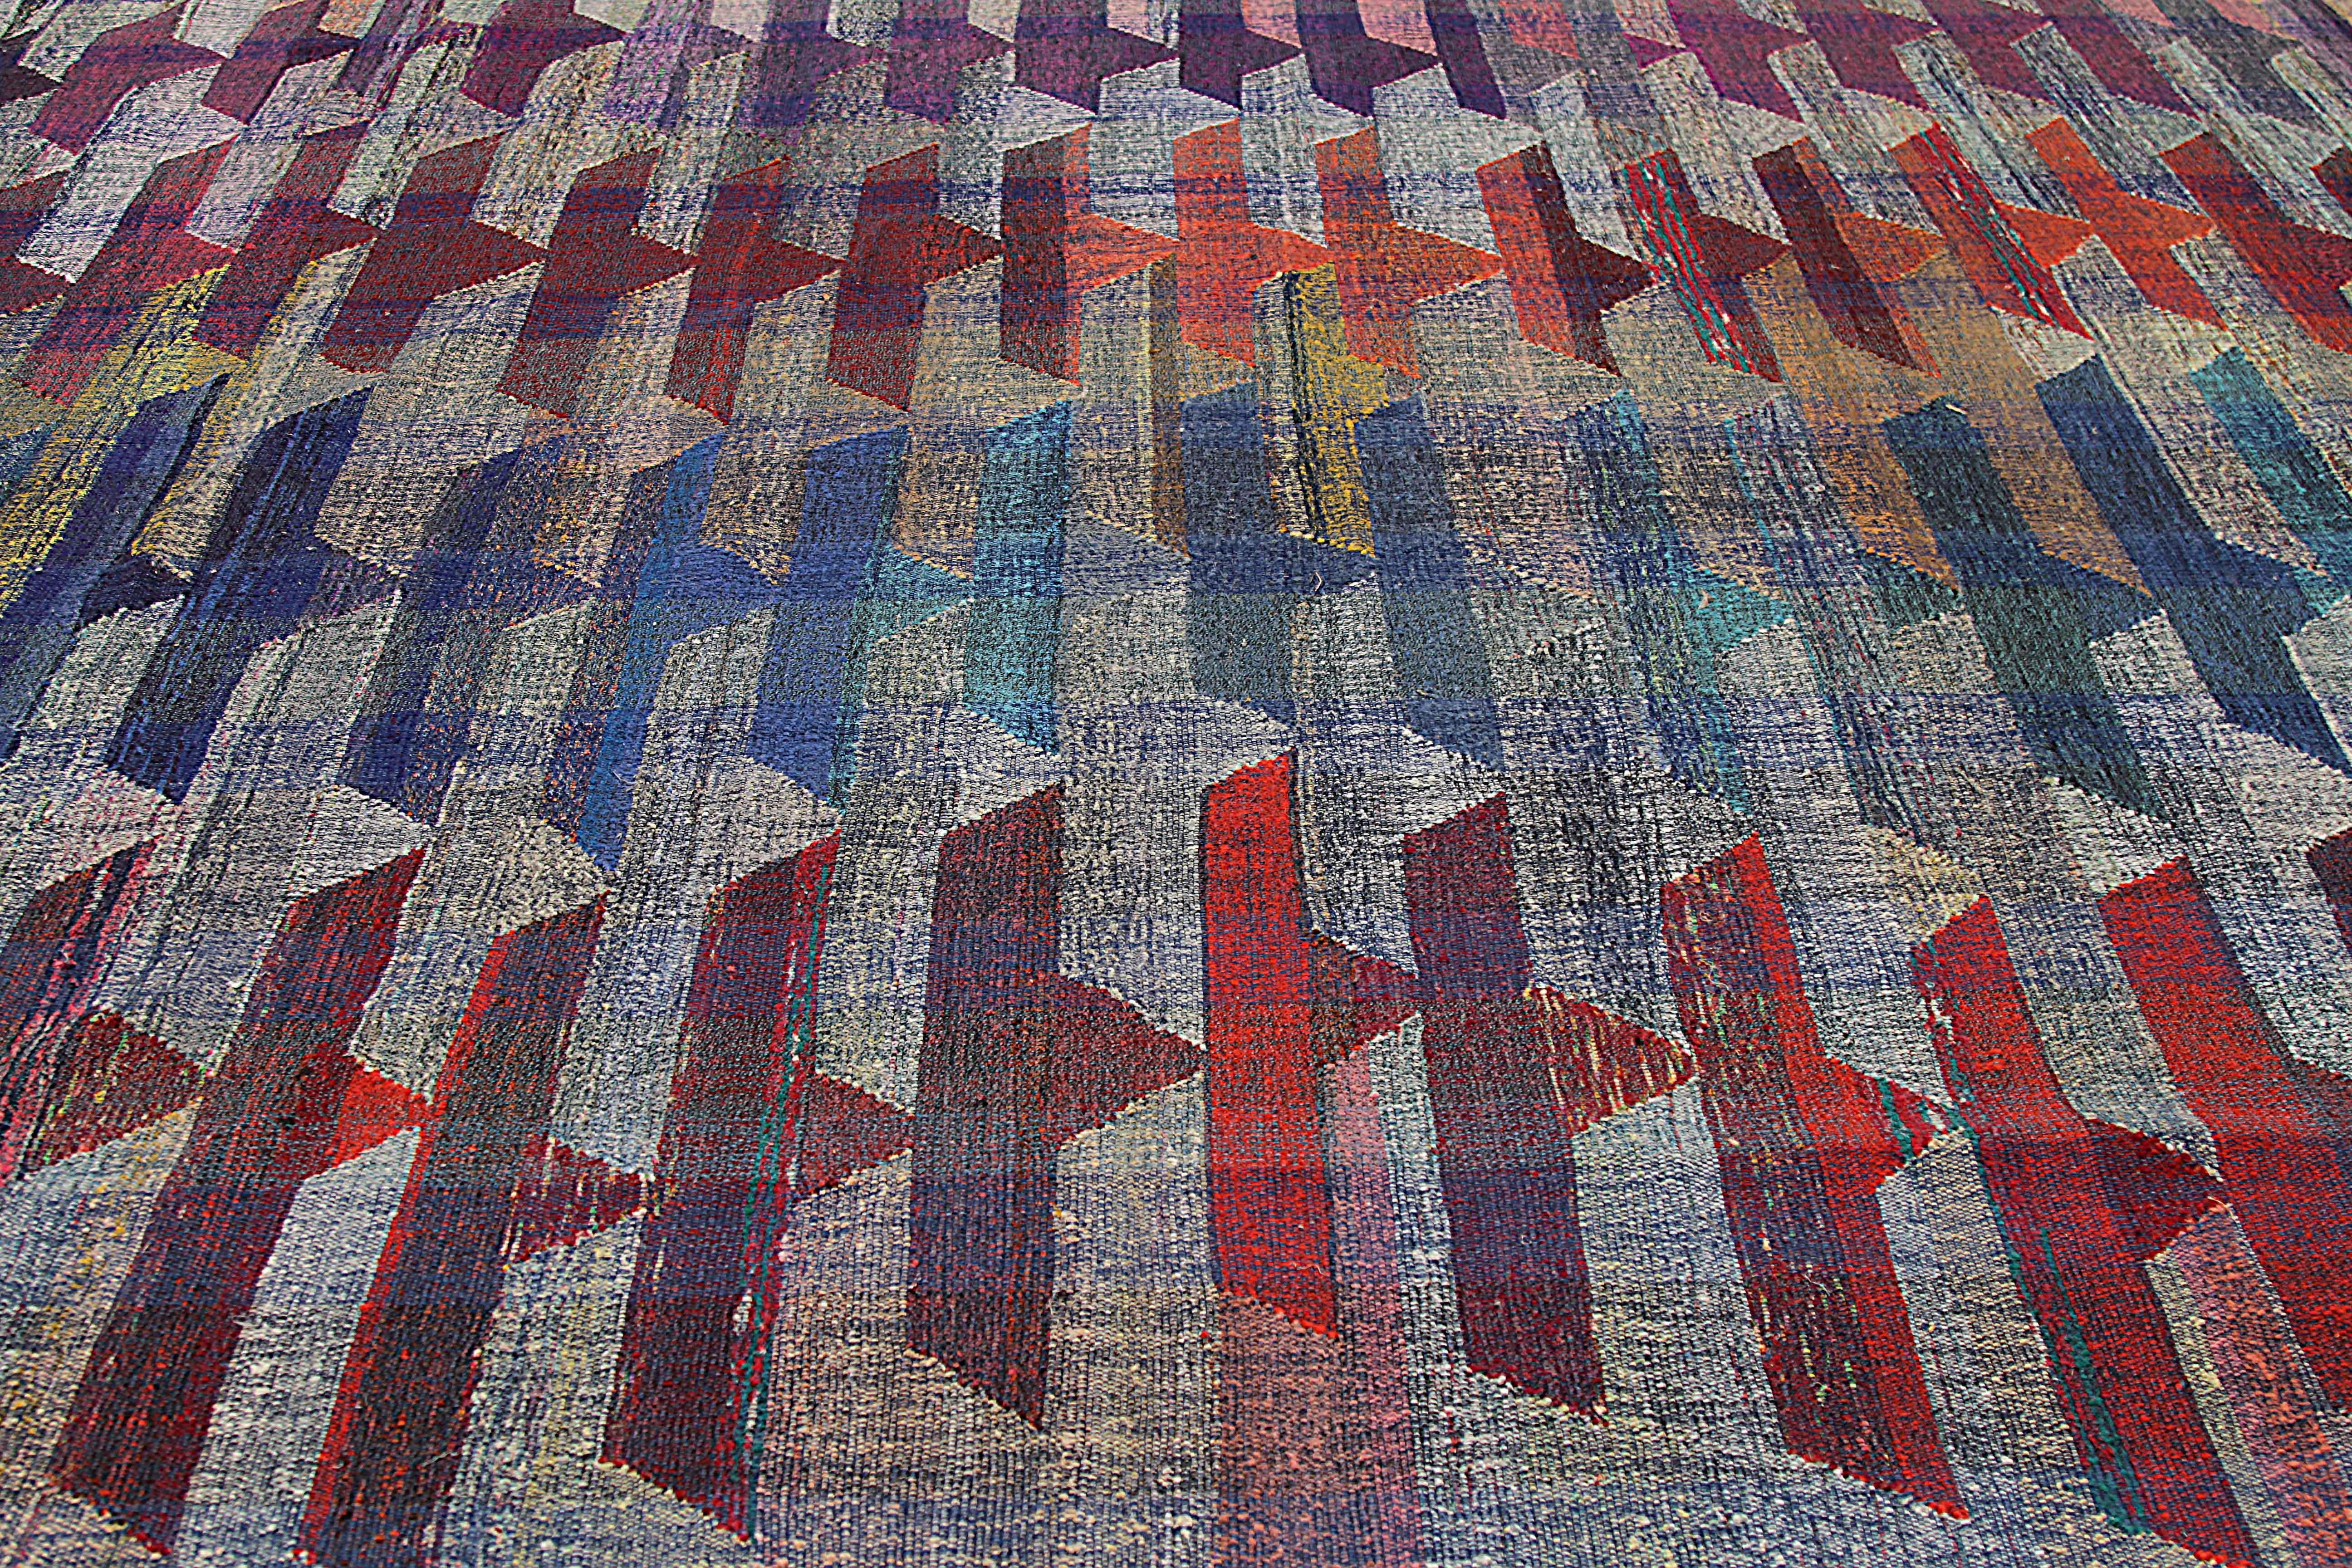 Hand-Woven Modern Turkish Kilim Rug Made of Antique Wool with Colored Paper Boats Pattern For Sale